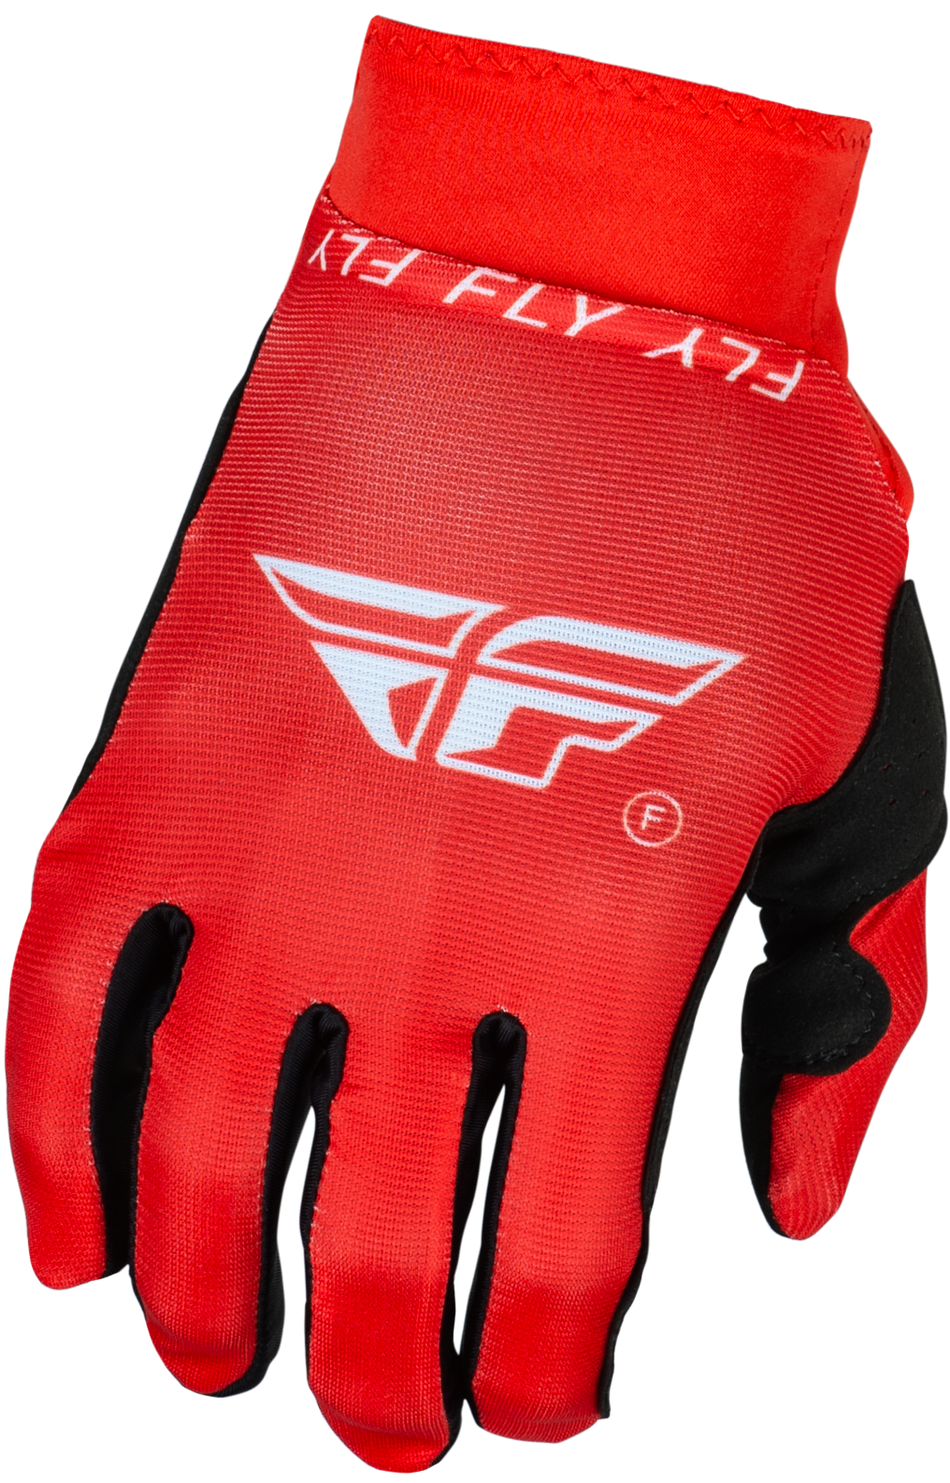 FLY RACING Pro Lite Gloves Red/White Md 377-044M